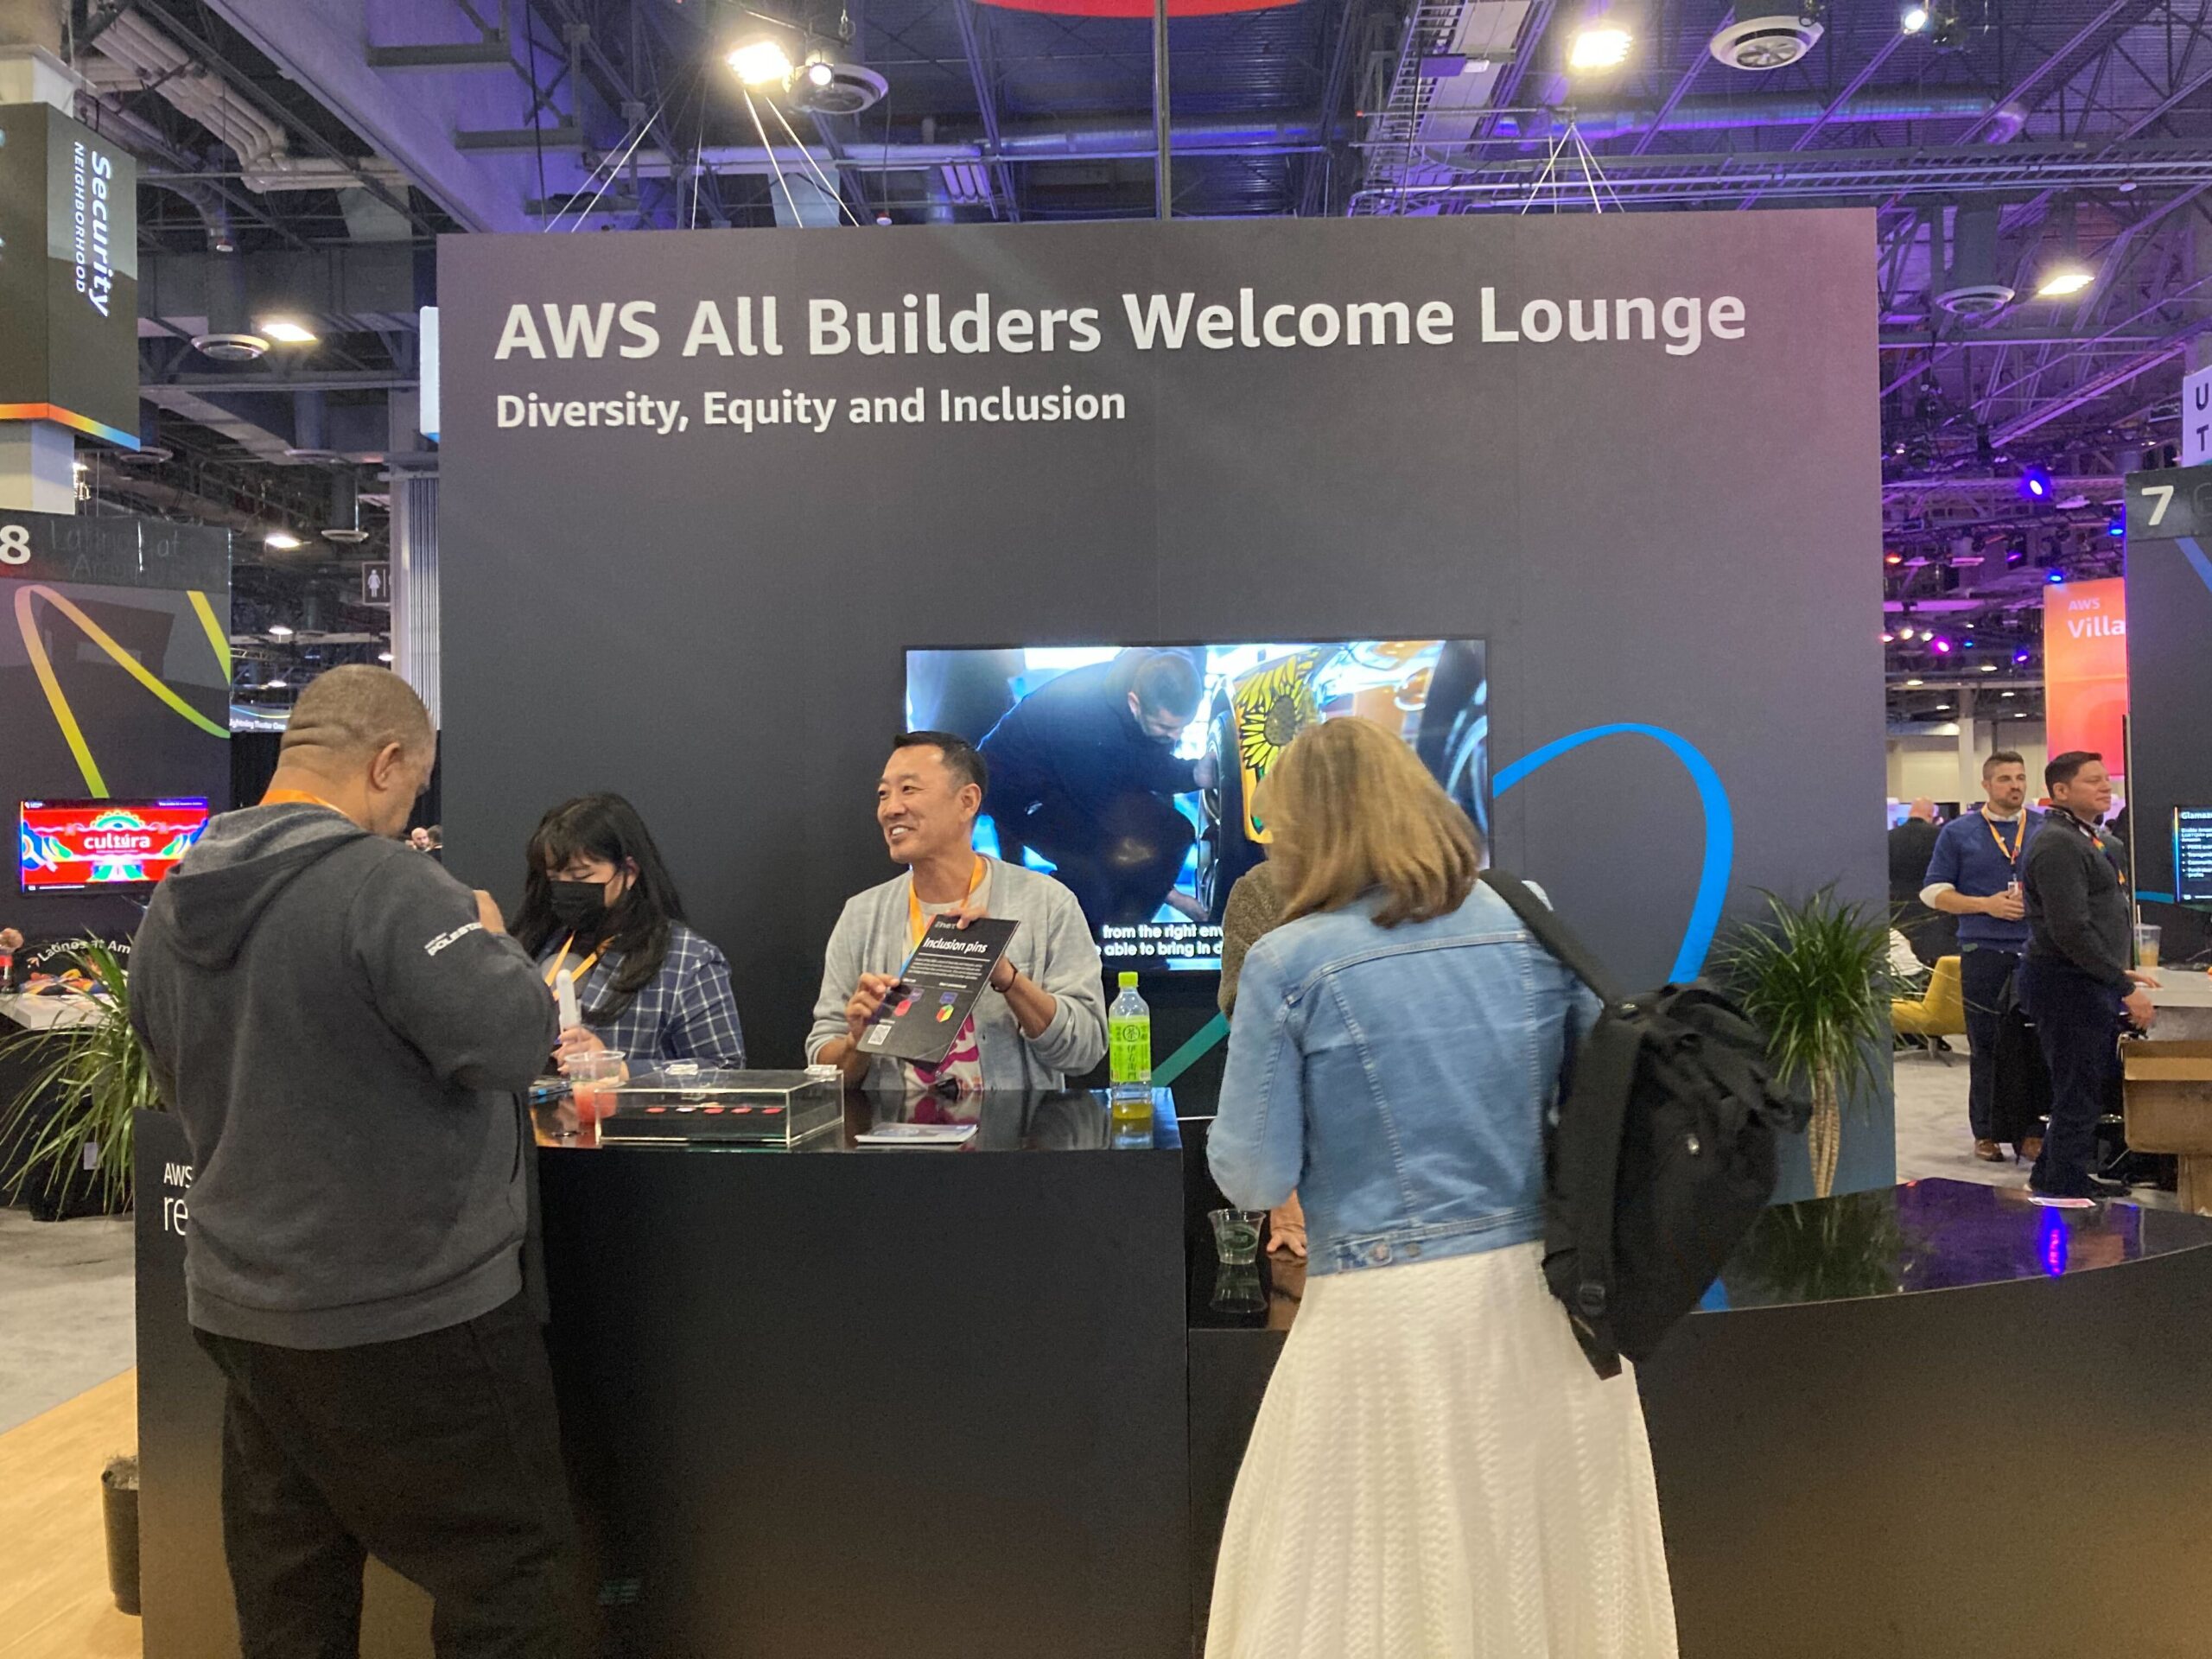 [EXPOブース紹介] 多様性があふれるAWS All Builders Lounge reinvent